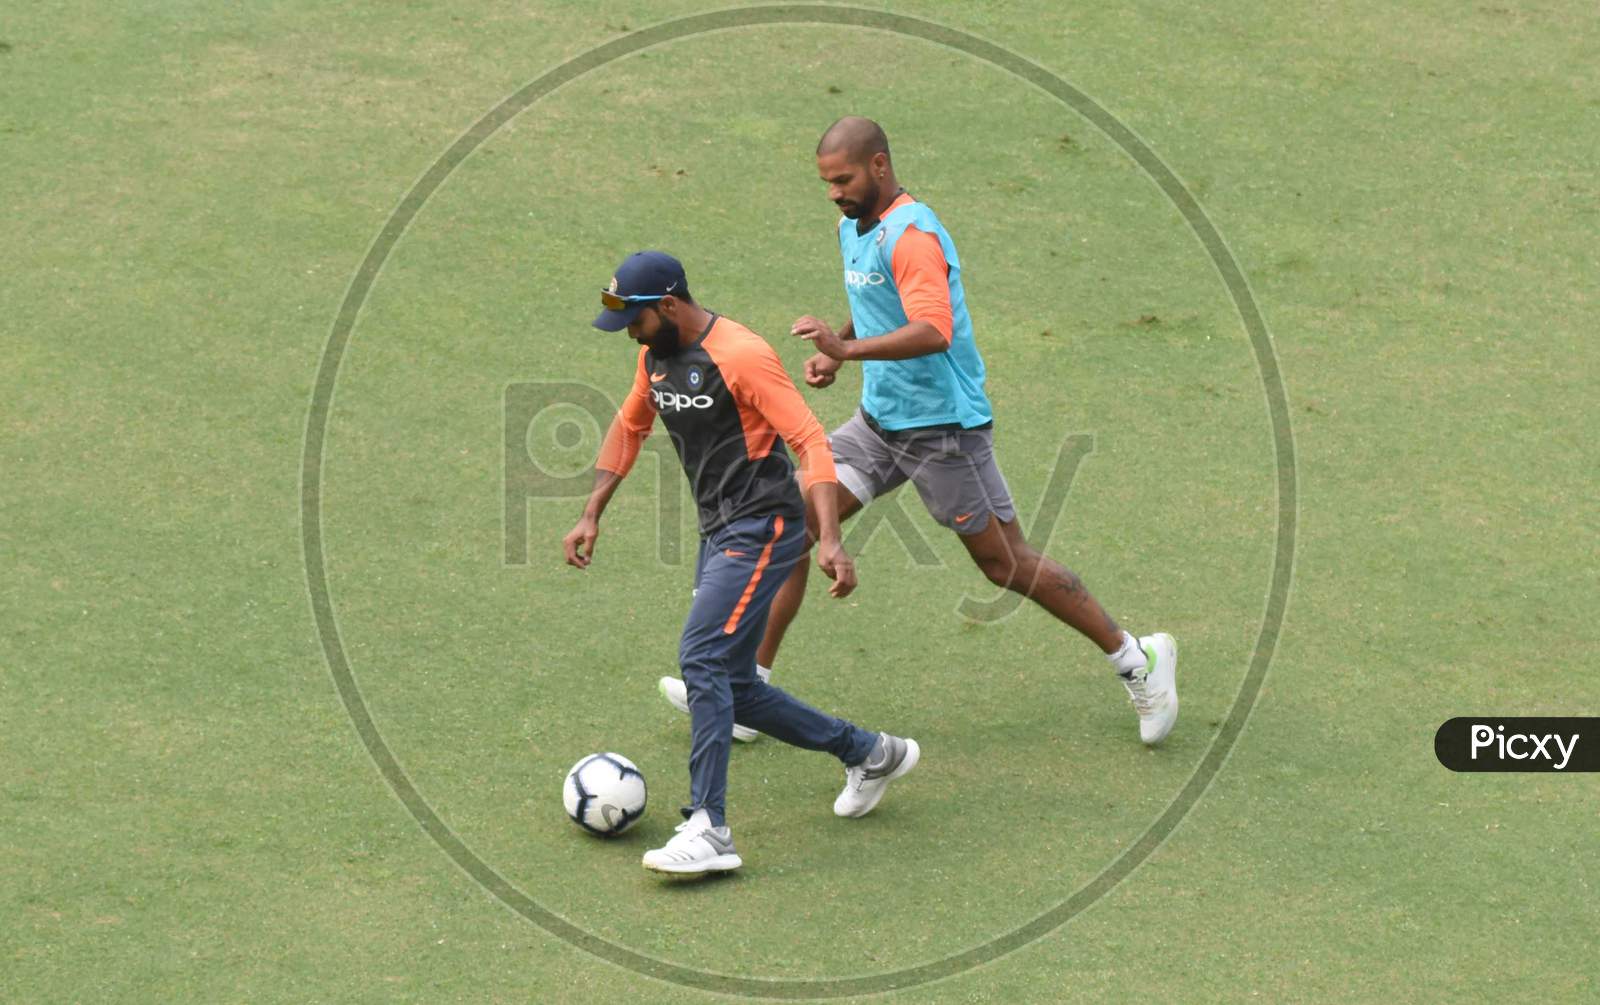 Team India Captain  Virat Kohli  And Sekhar Dhawan Plays Football During A Practice Session Ahead Of The First One Day International Cricket Match Against West Indies, At Aca Cricket Stadium, Barsapara In Guwahati